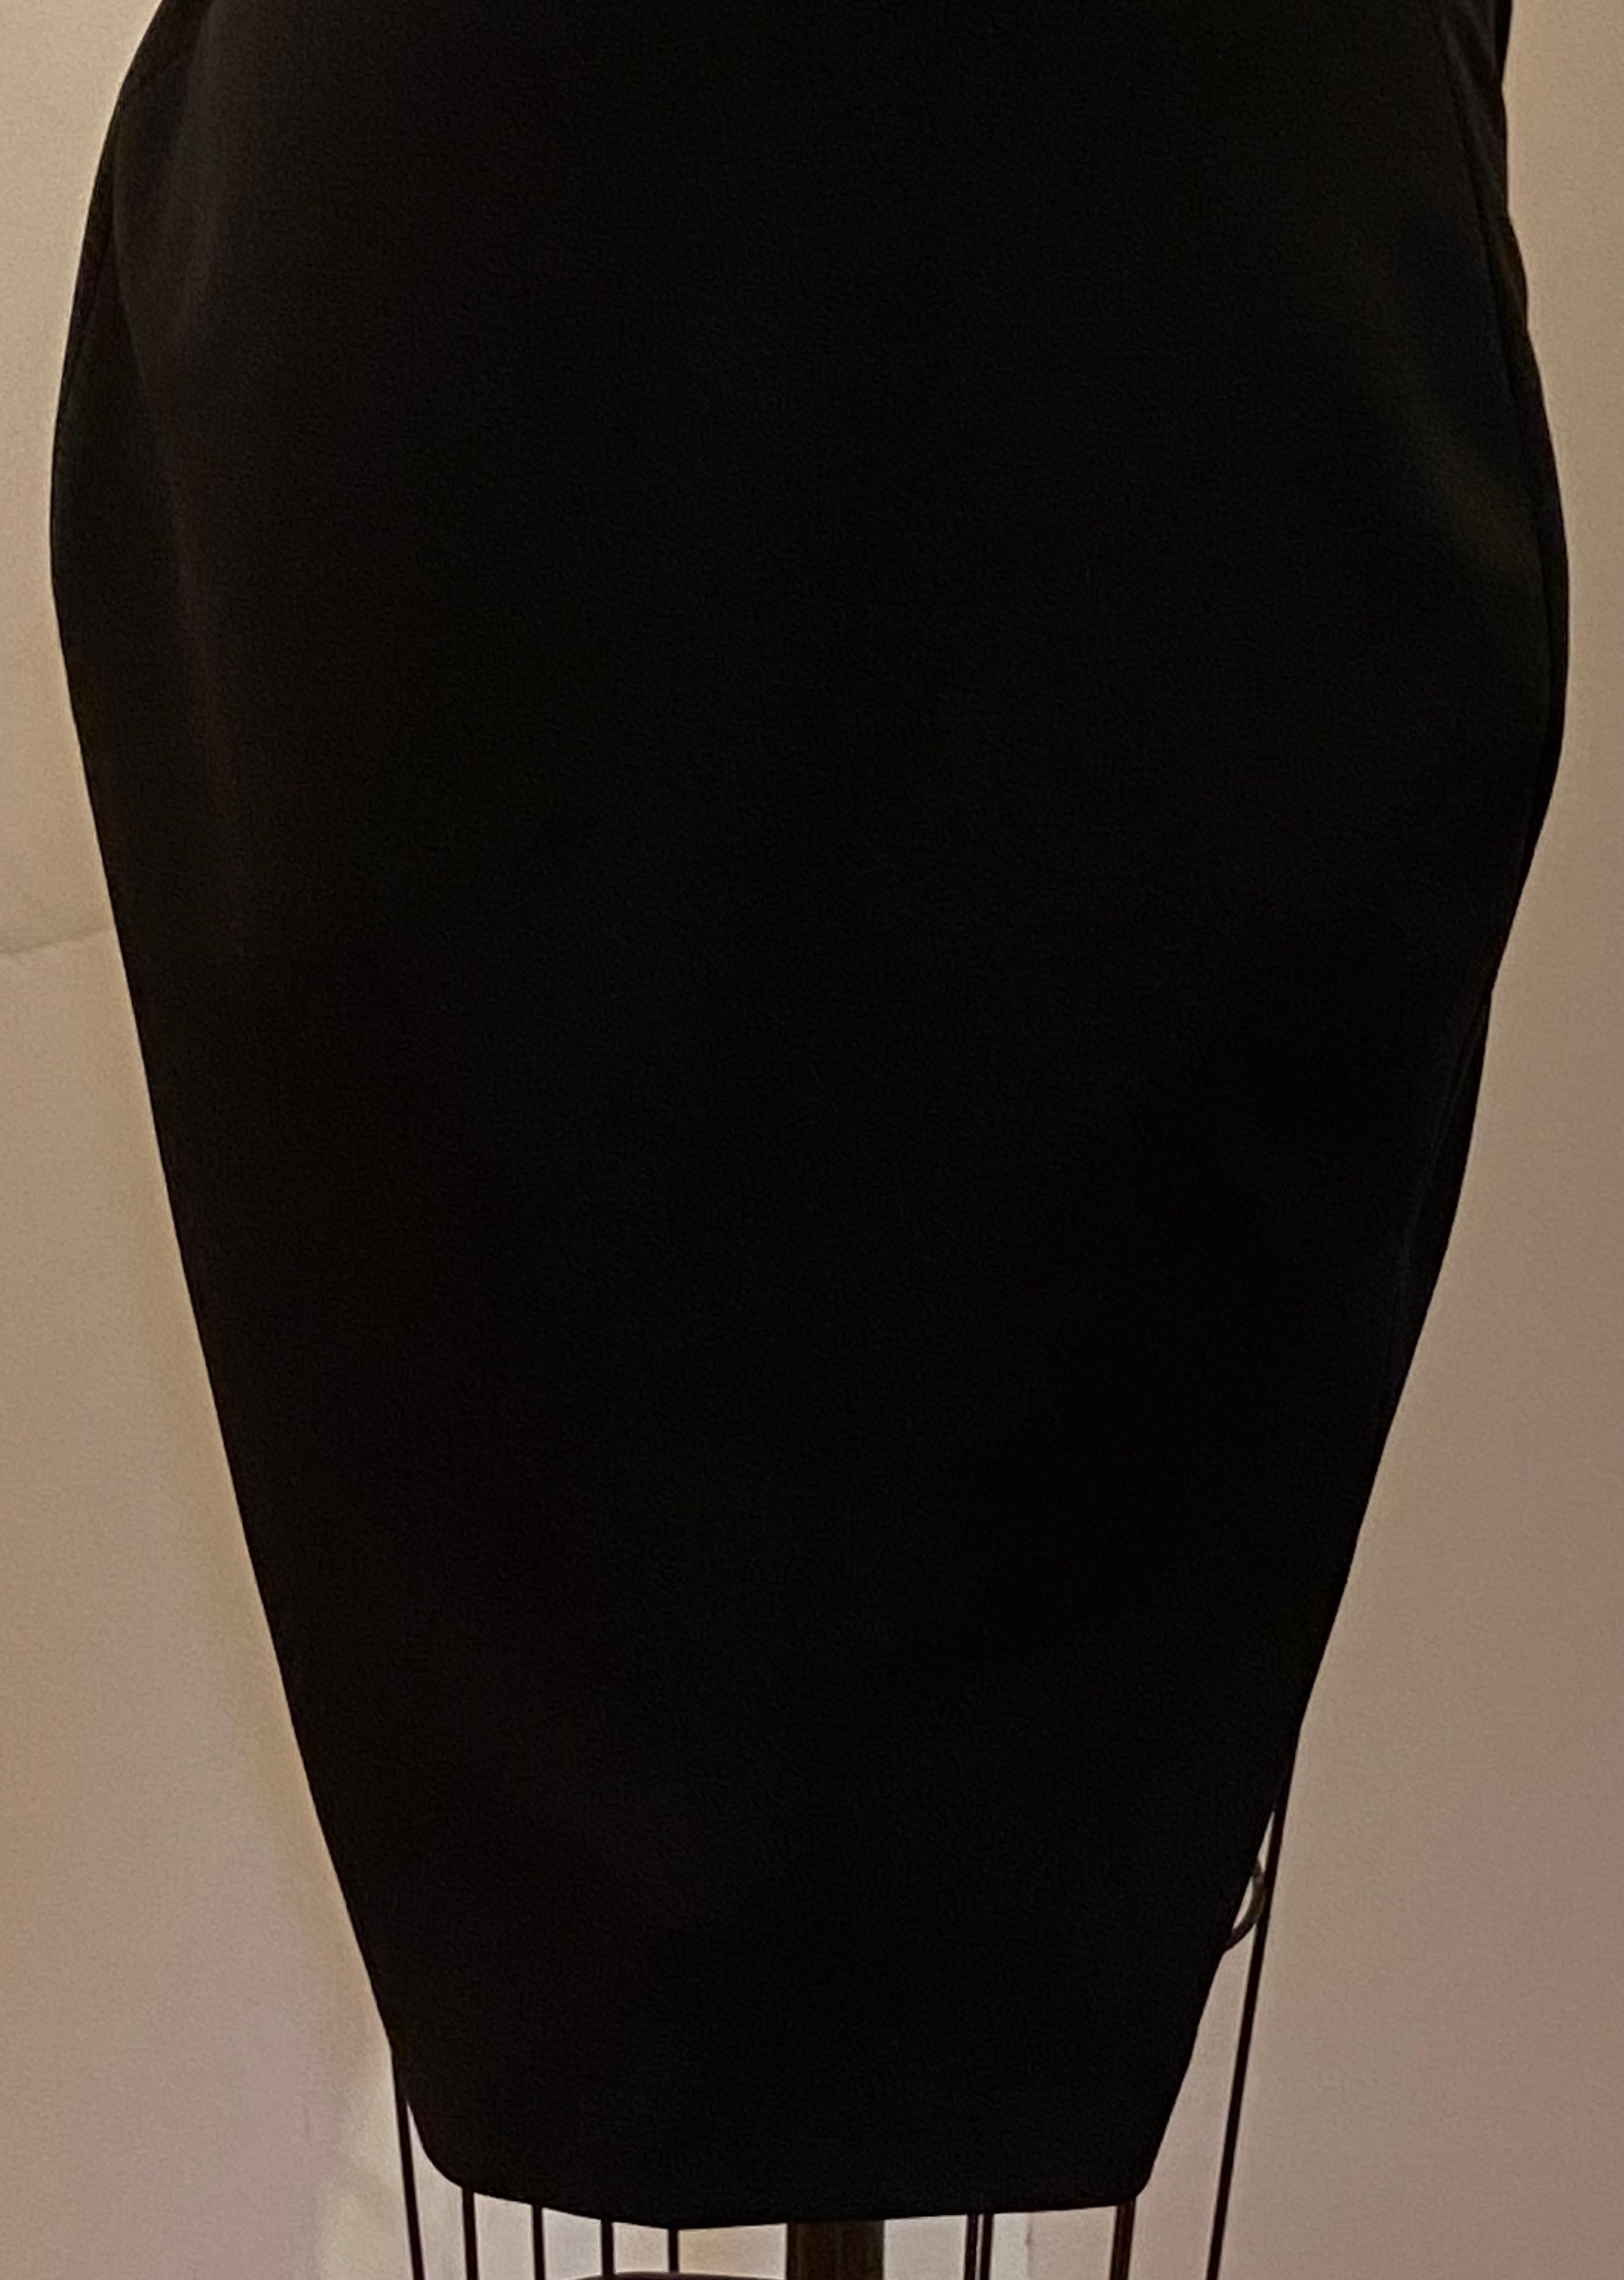 'House of London' Black Abstract Deconstruct Whimsical Evening Cocktail Dress For Sale 5